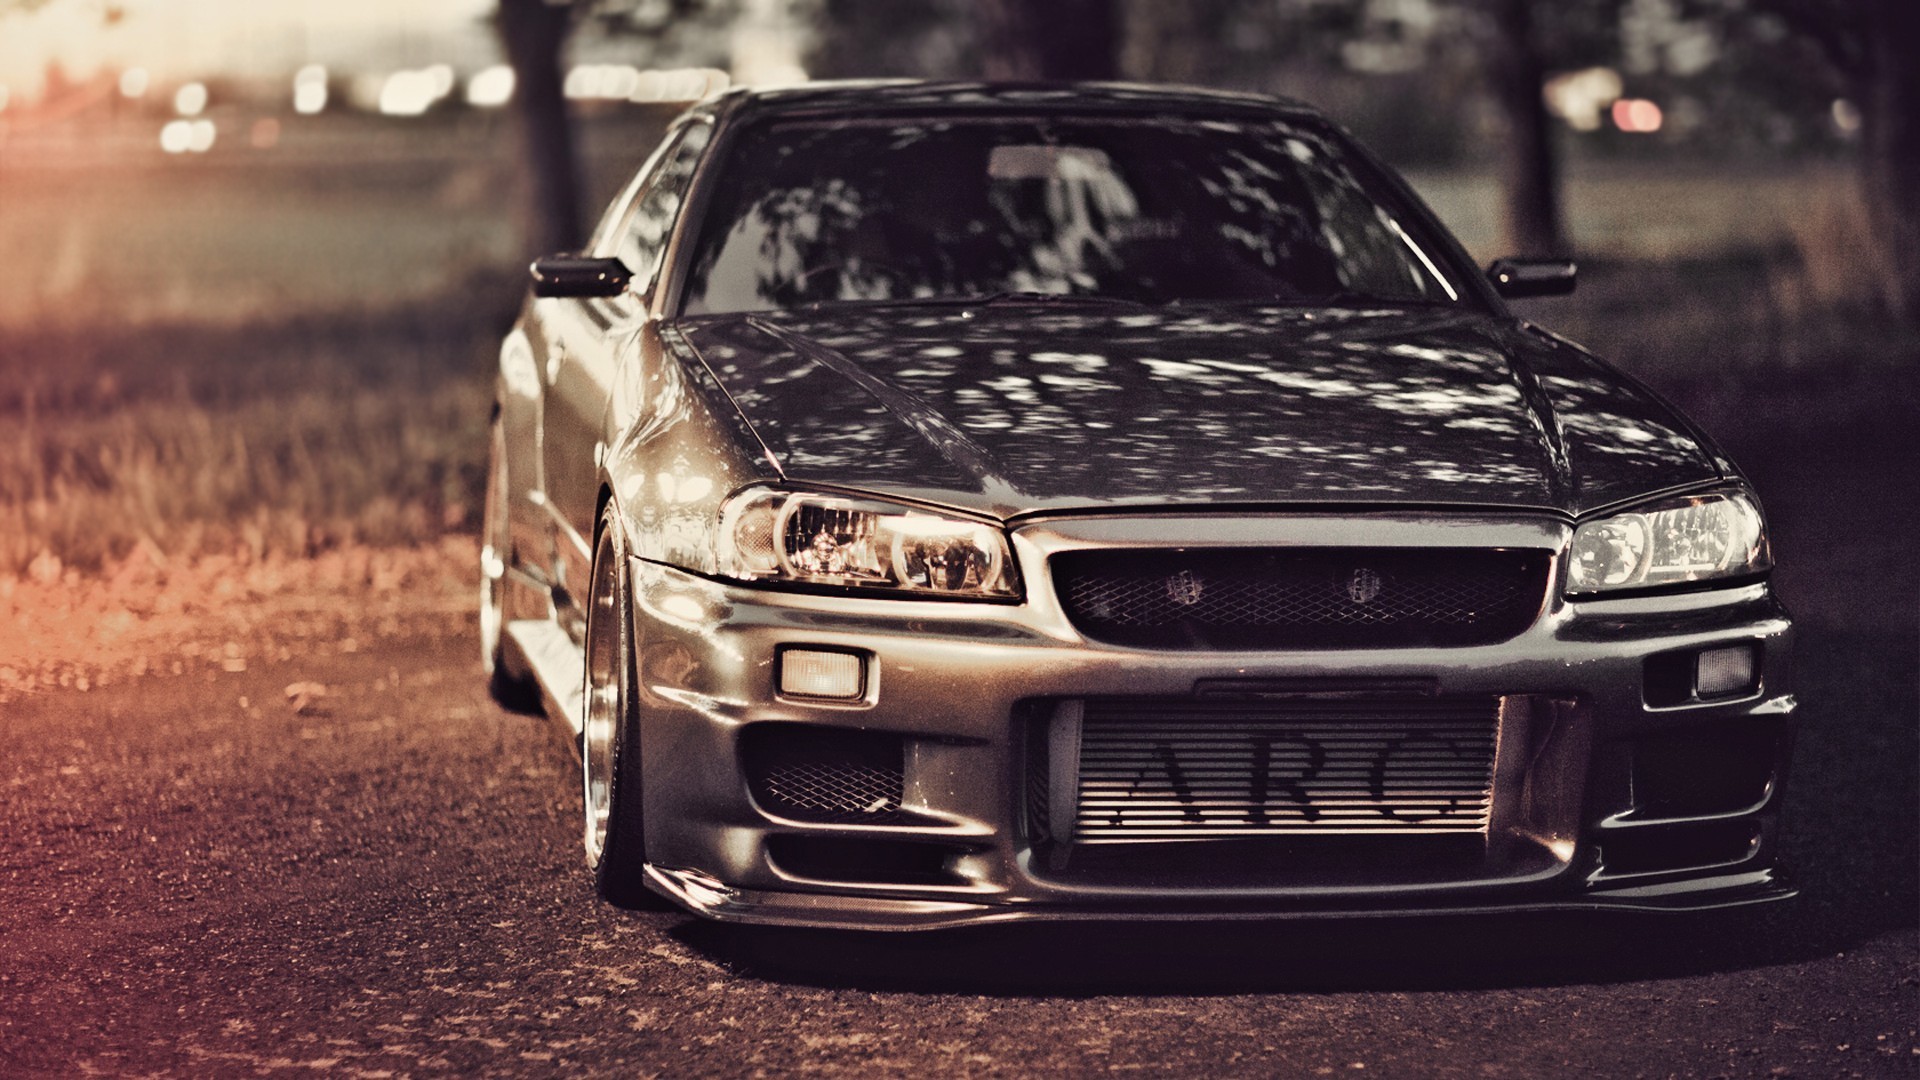 1920x1080 HD wallpapers jdm and widescreen backgrounds free 1920Ã1080 JDM Wallpapers  (58 Wallpapers)